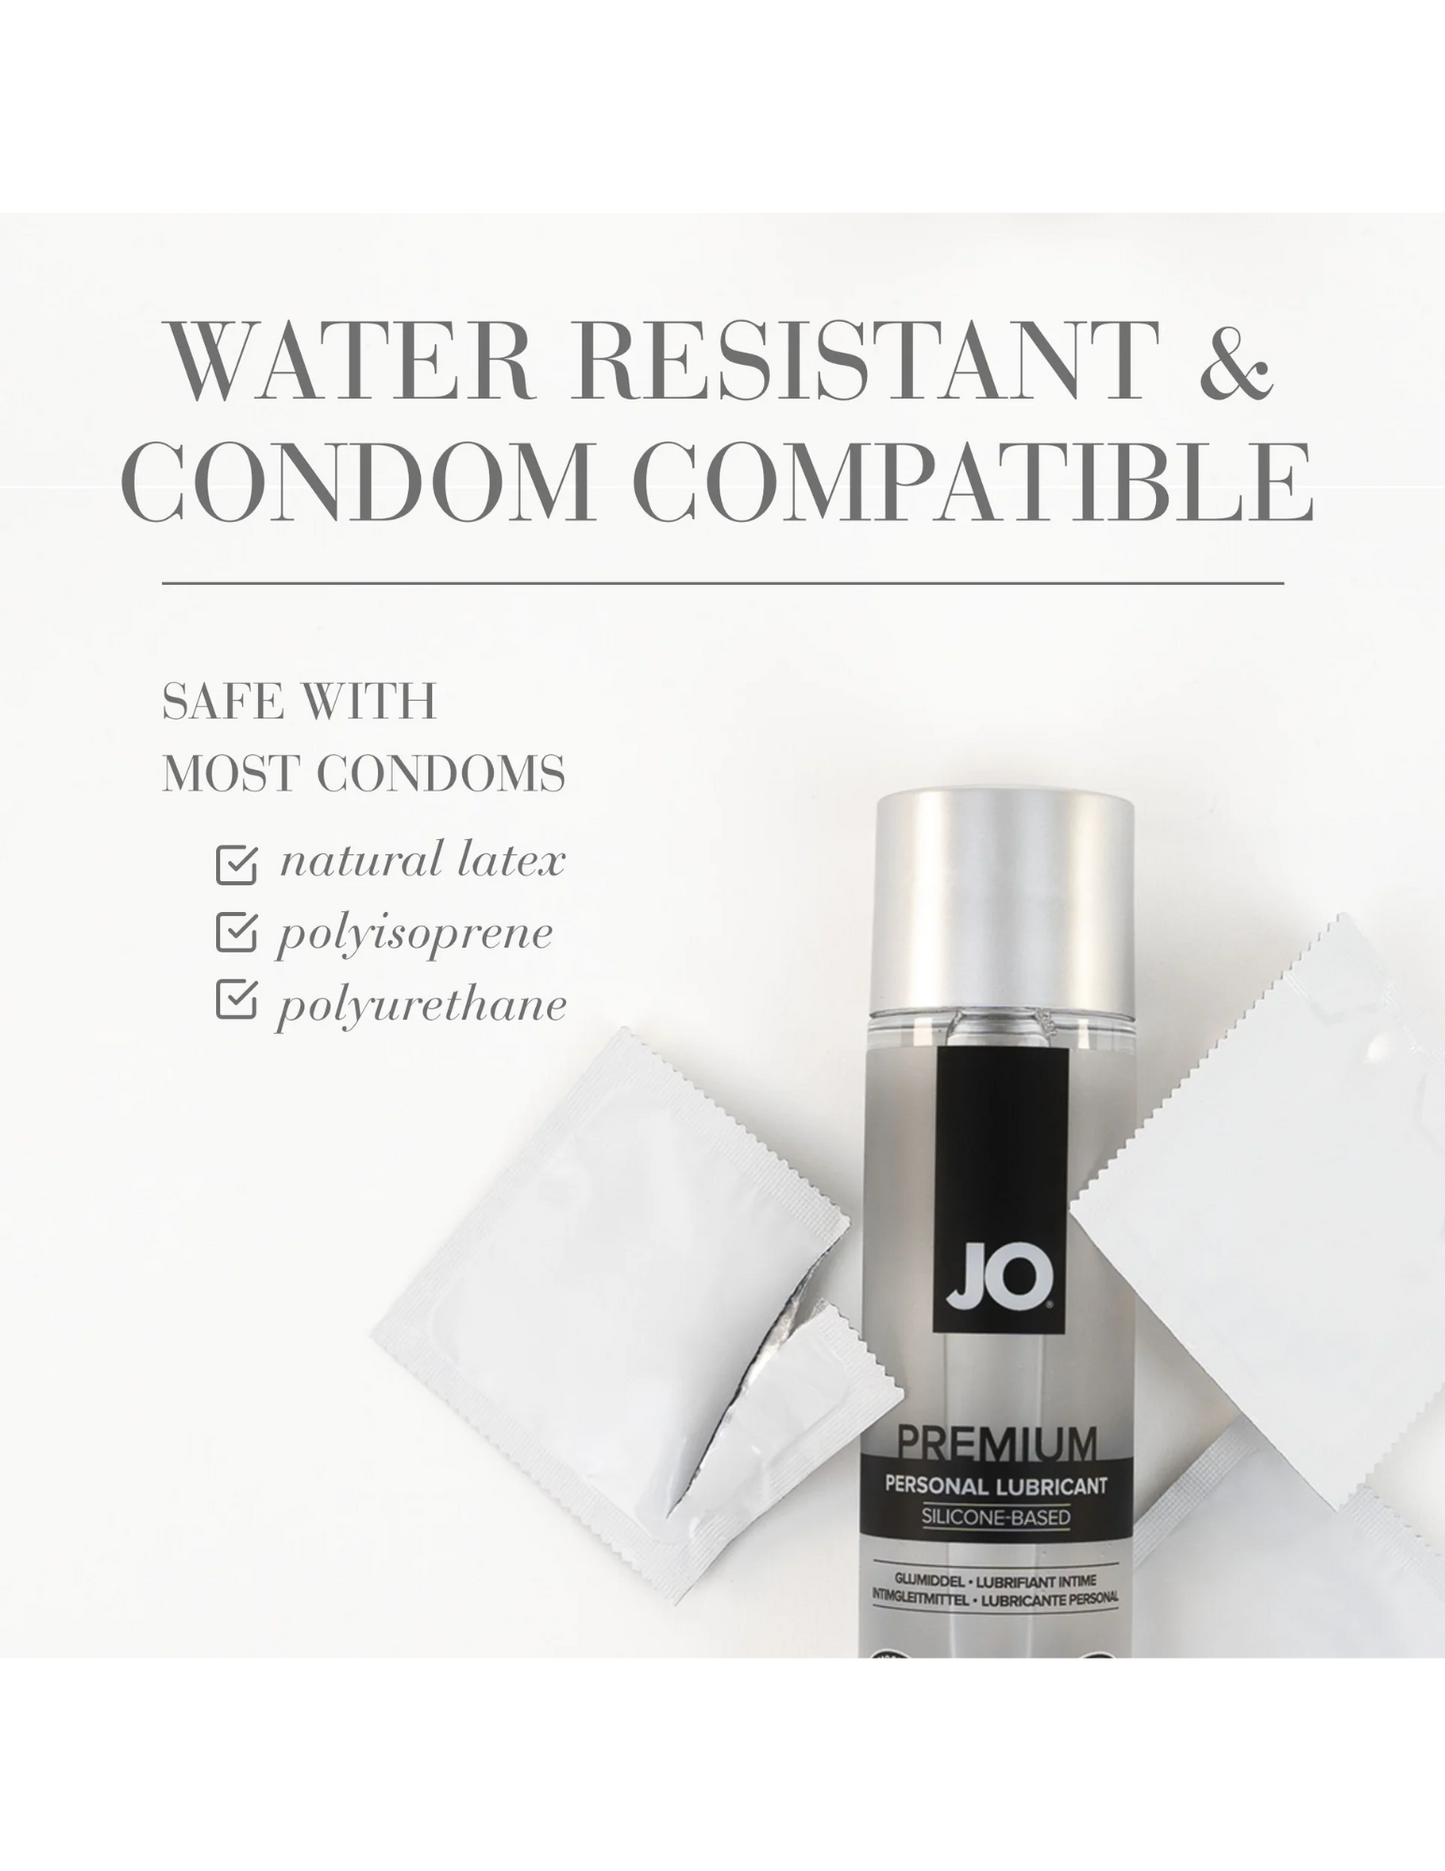 Ad for the System JO Premium Silicone Lubricant.